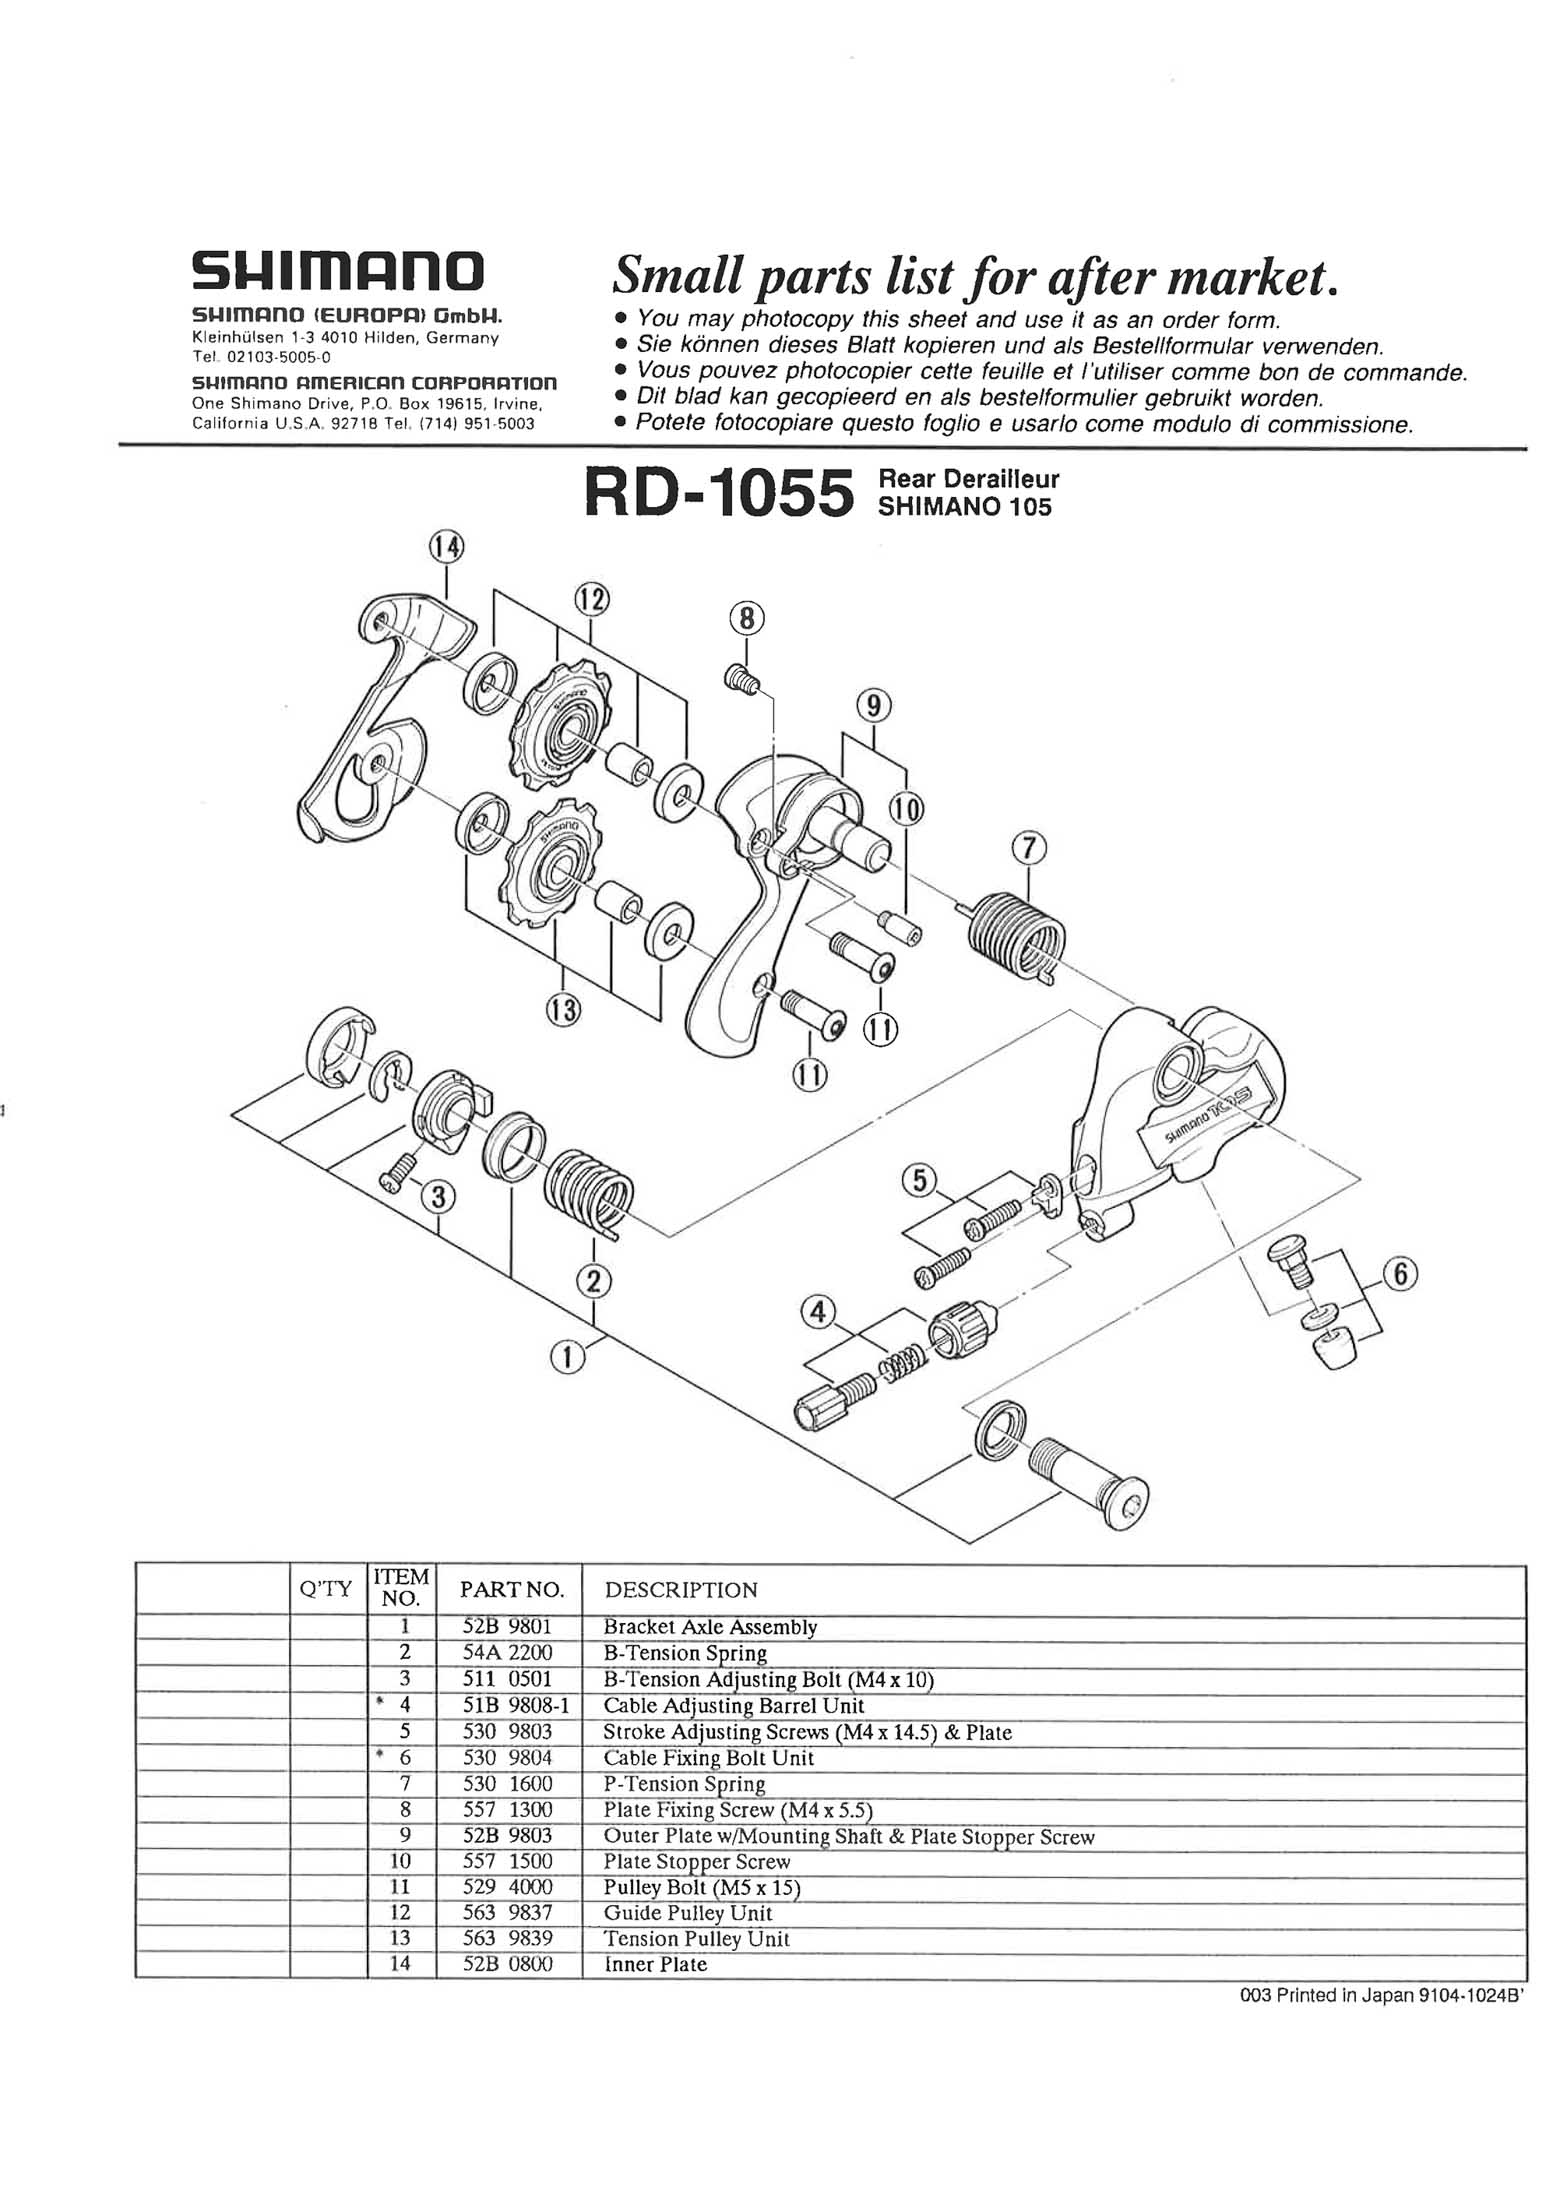 Shimano web site 2020 - exploded views from 1991 image 1 main image